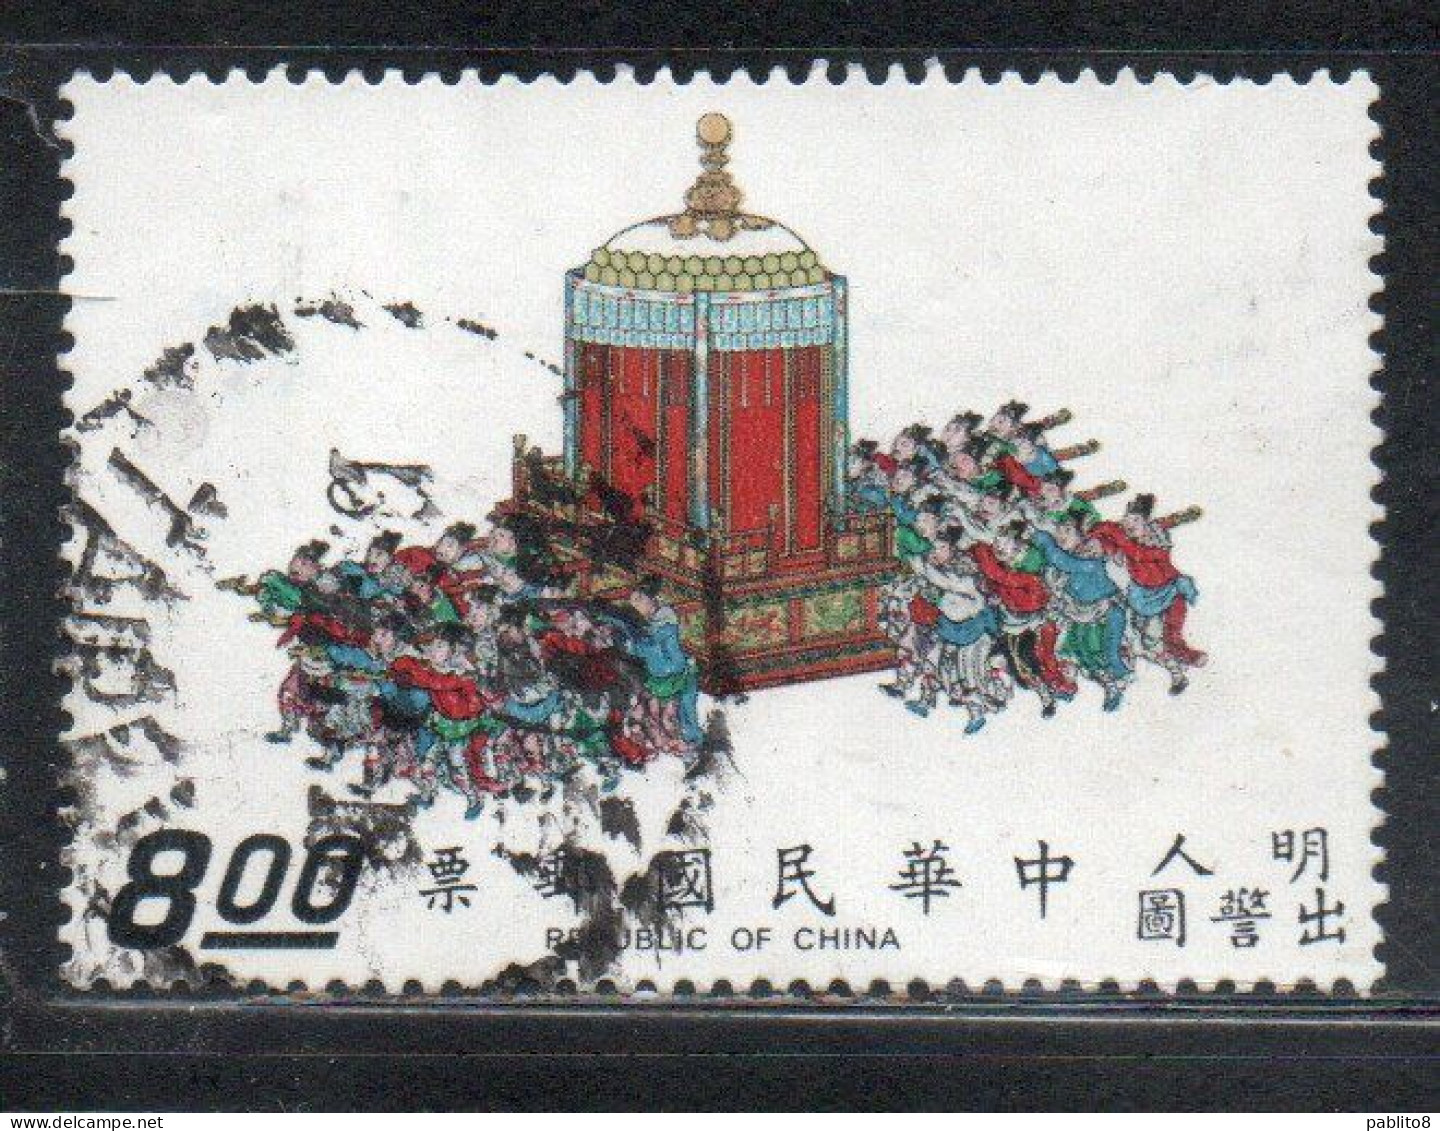 CHINA REPUBLIC CINA TAIWAN FORMOSA 1972 SCROLLS DEPICTING EMPEROR SHIH-TSUNG'S SEDAN CHAIR CARRIED BY 28 ME8$ USED USATO - Usados